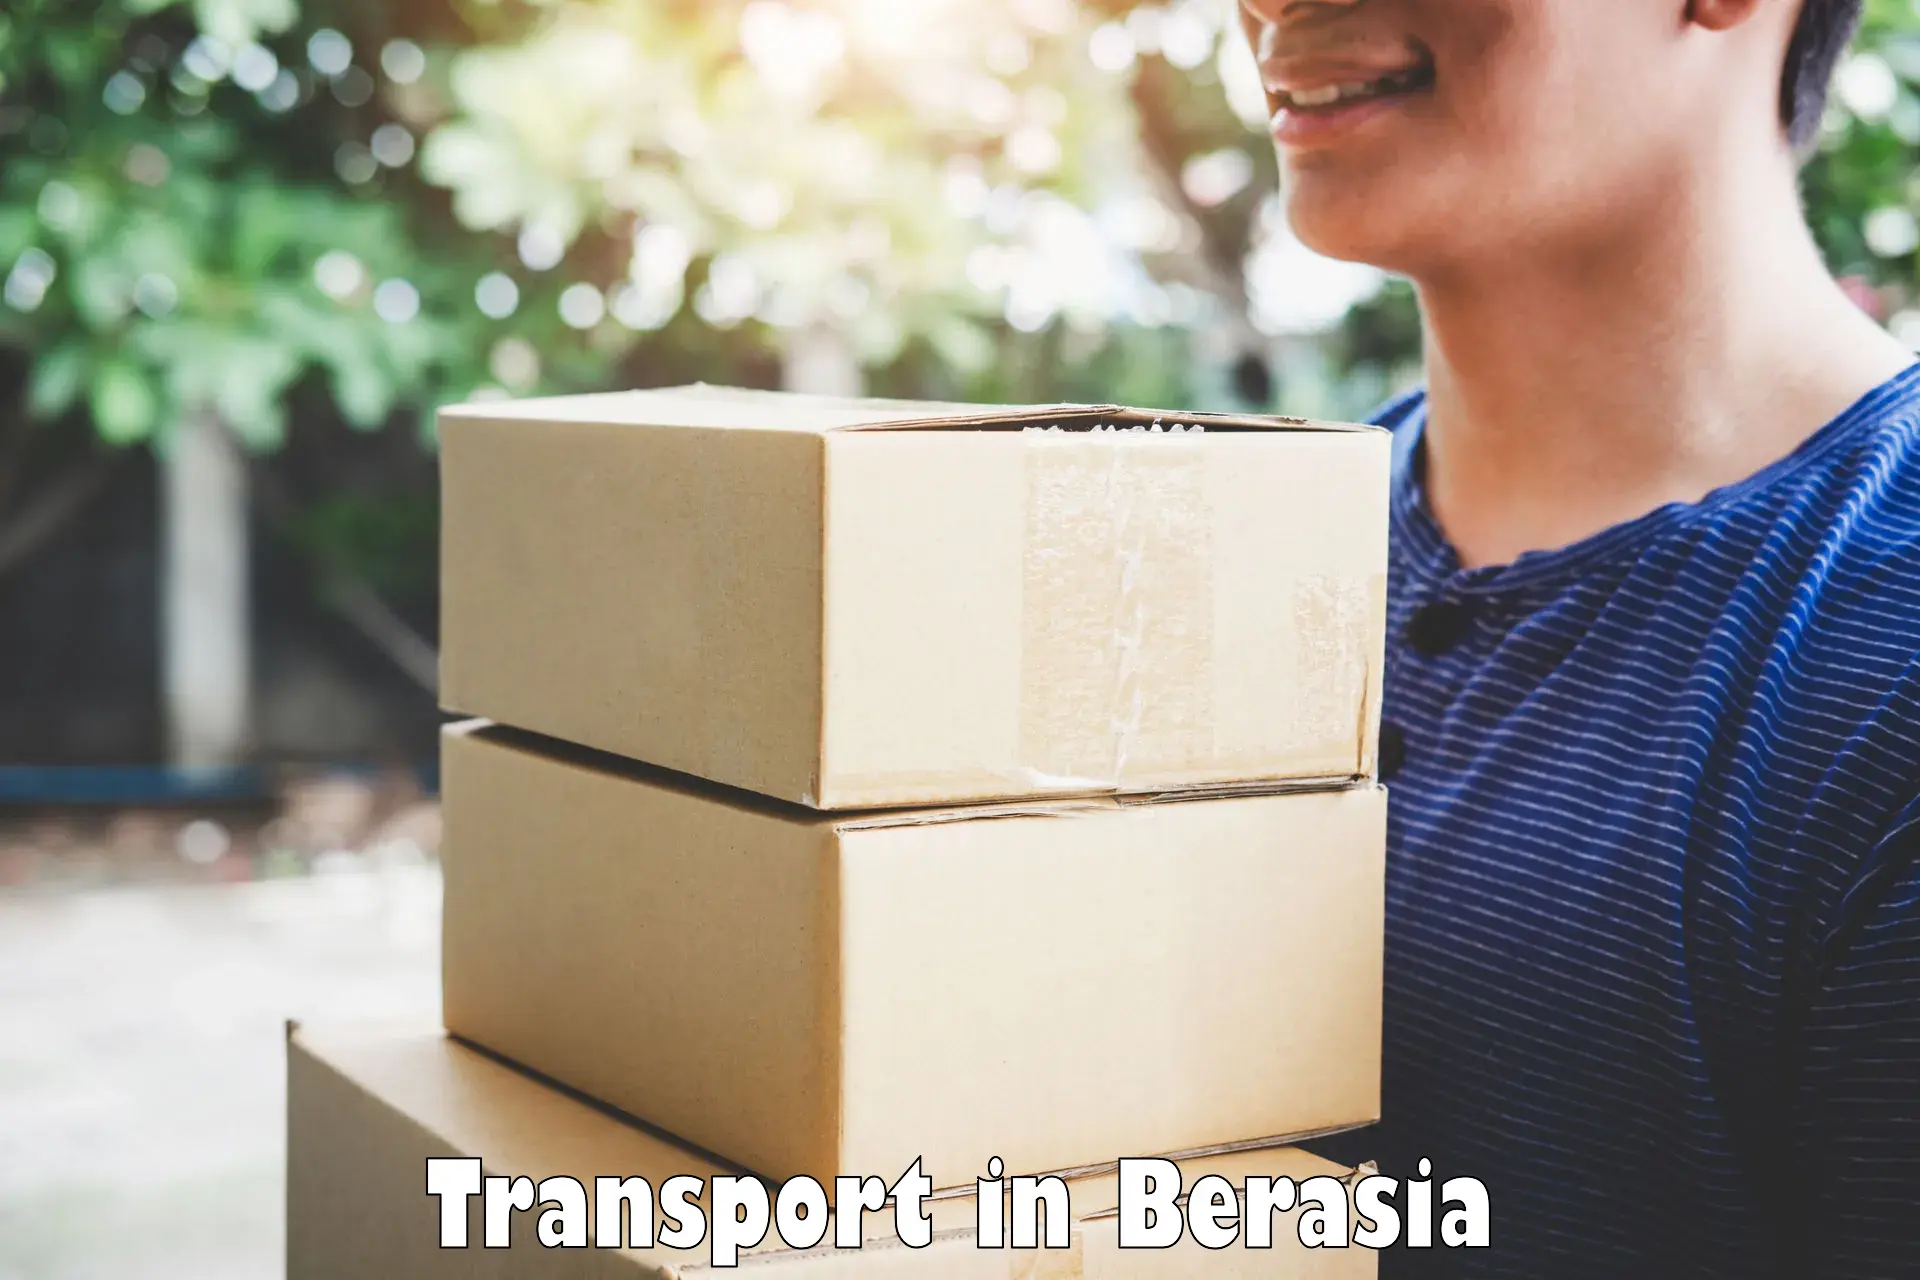 Two wheeler transport services in Berasia